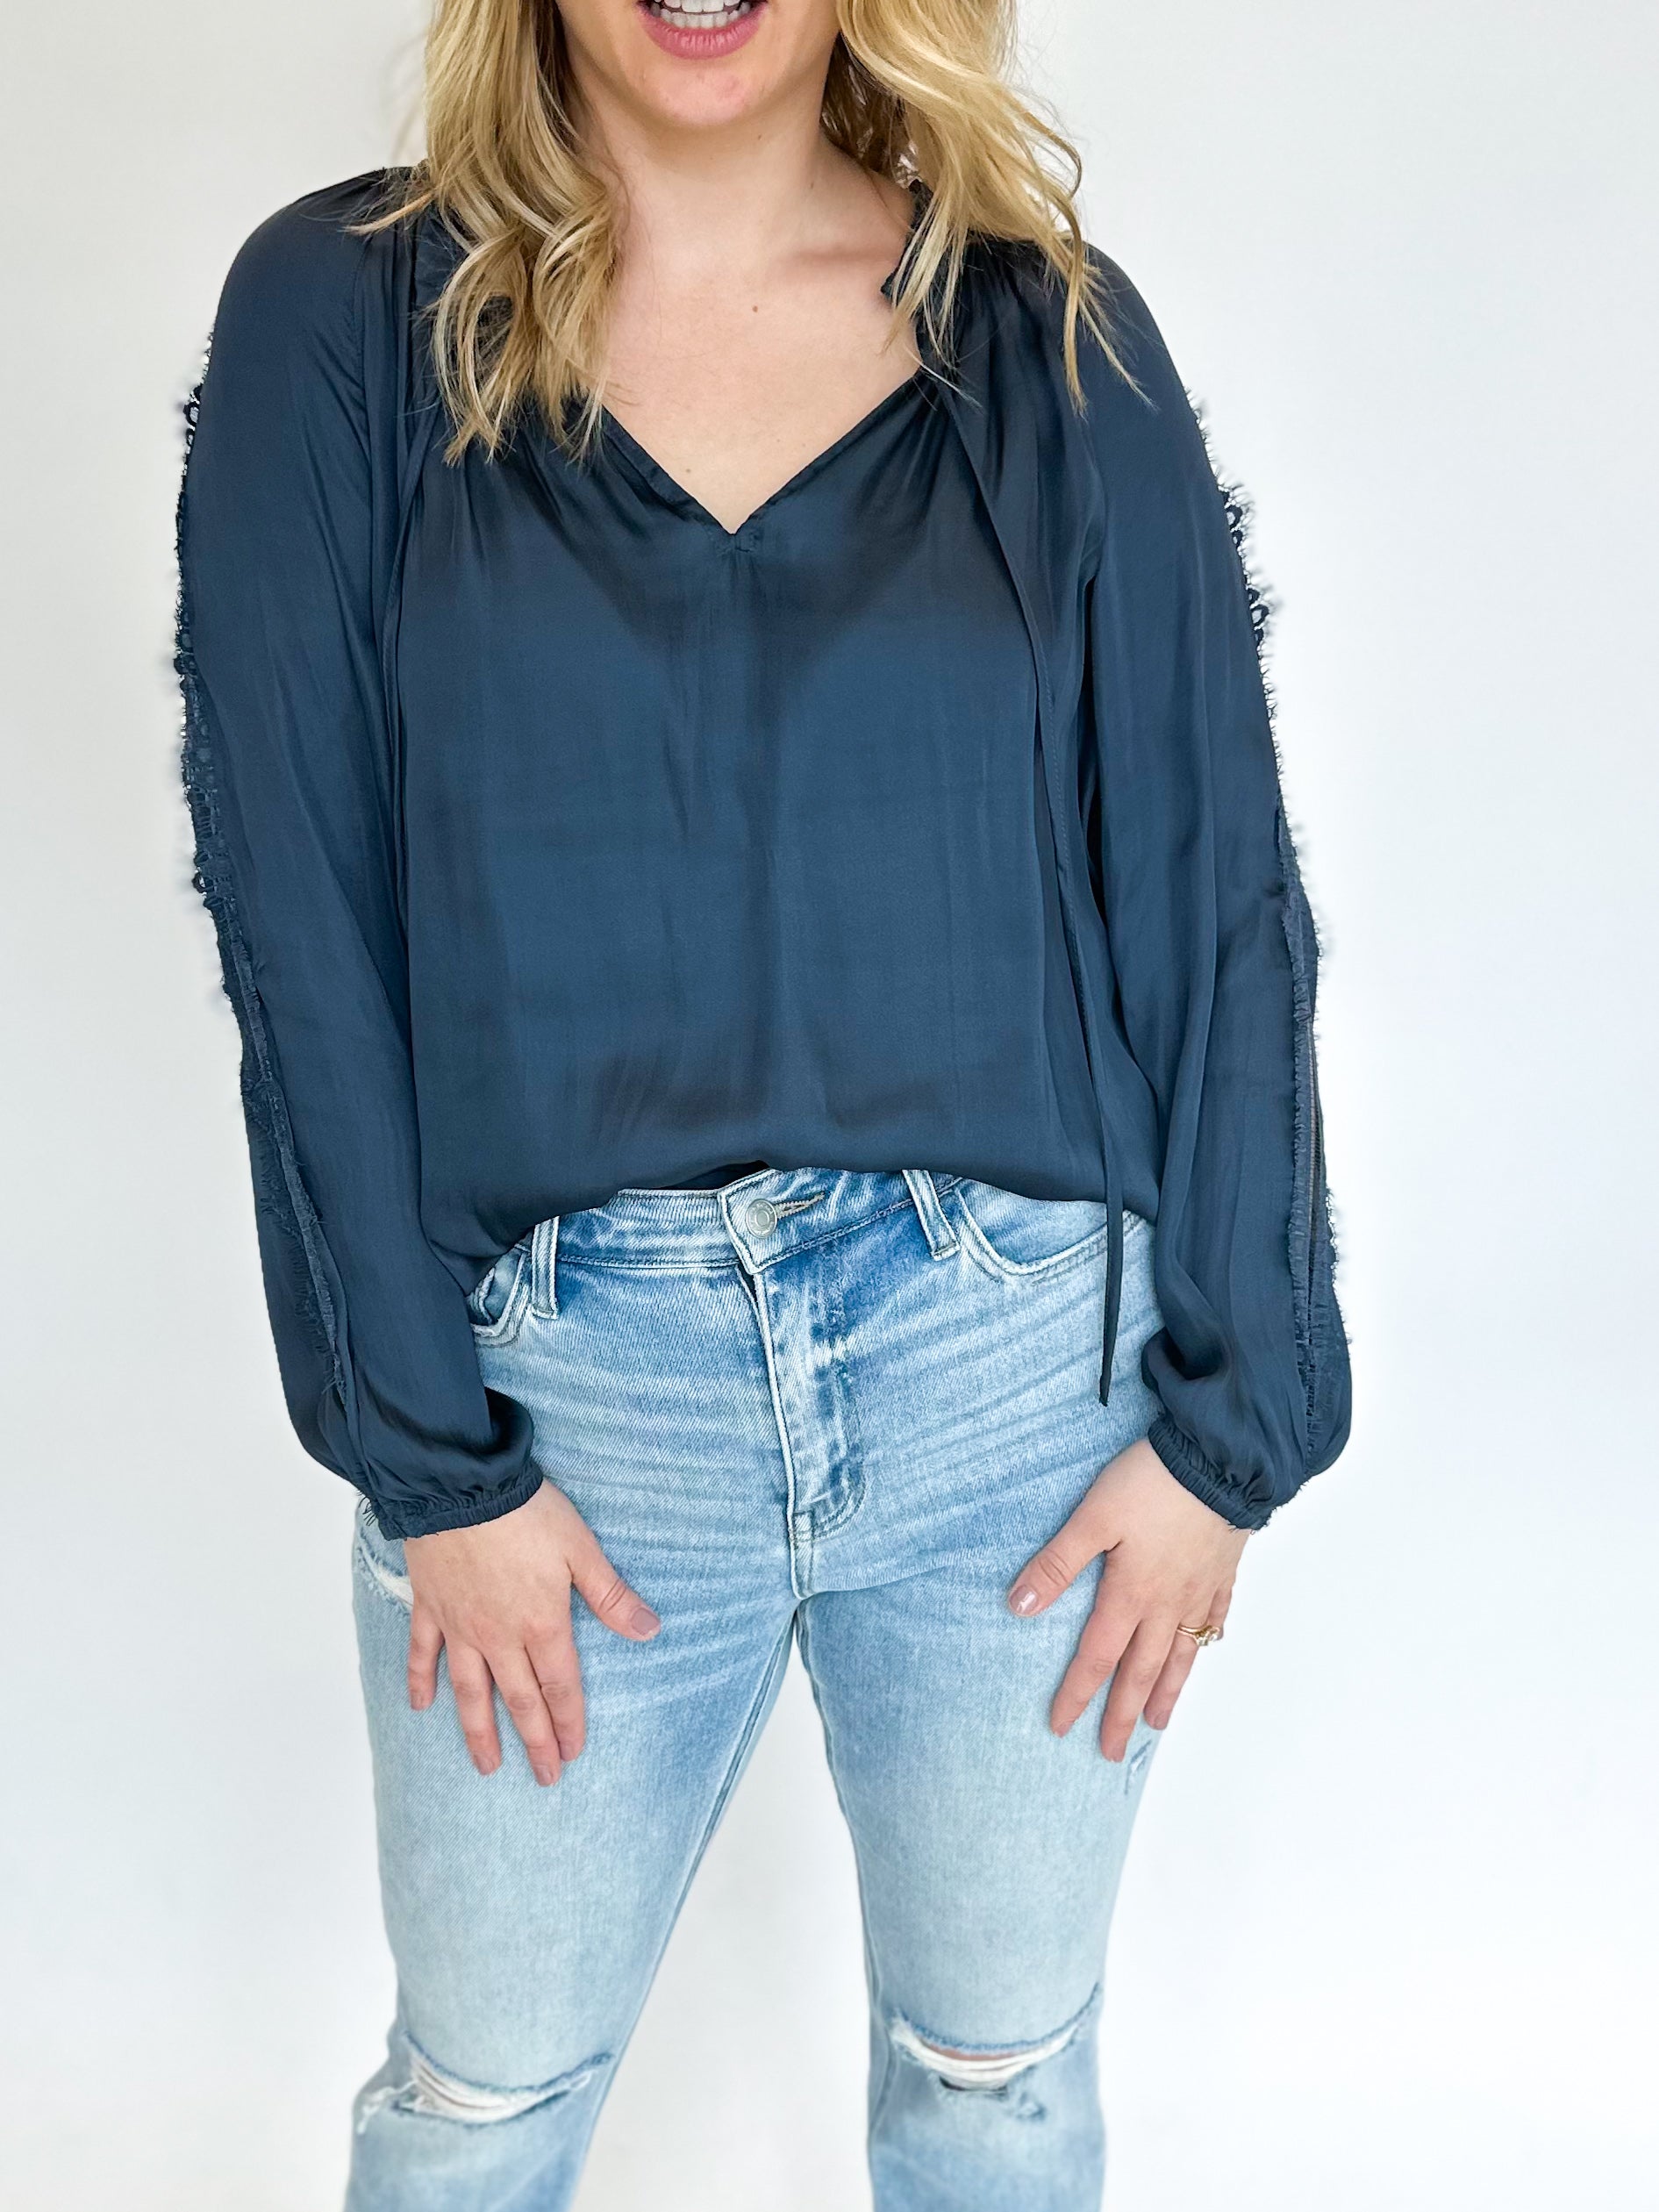 Lacey Details Blouse - True Blue-200 Fashion Blouses-CURRENT AIR CLOTHING-July & June Women's Fashion Boutique Located in San Antonio, Texas